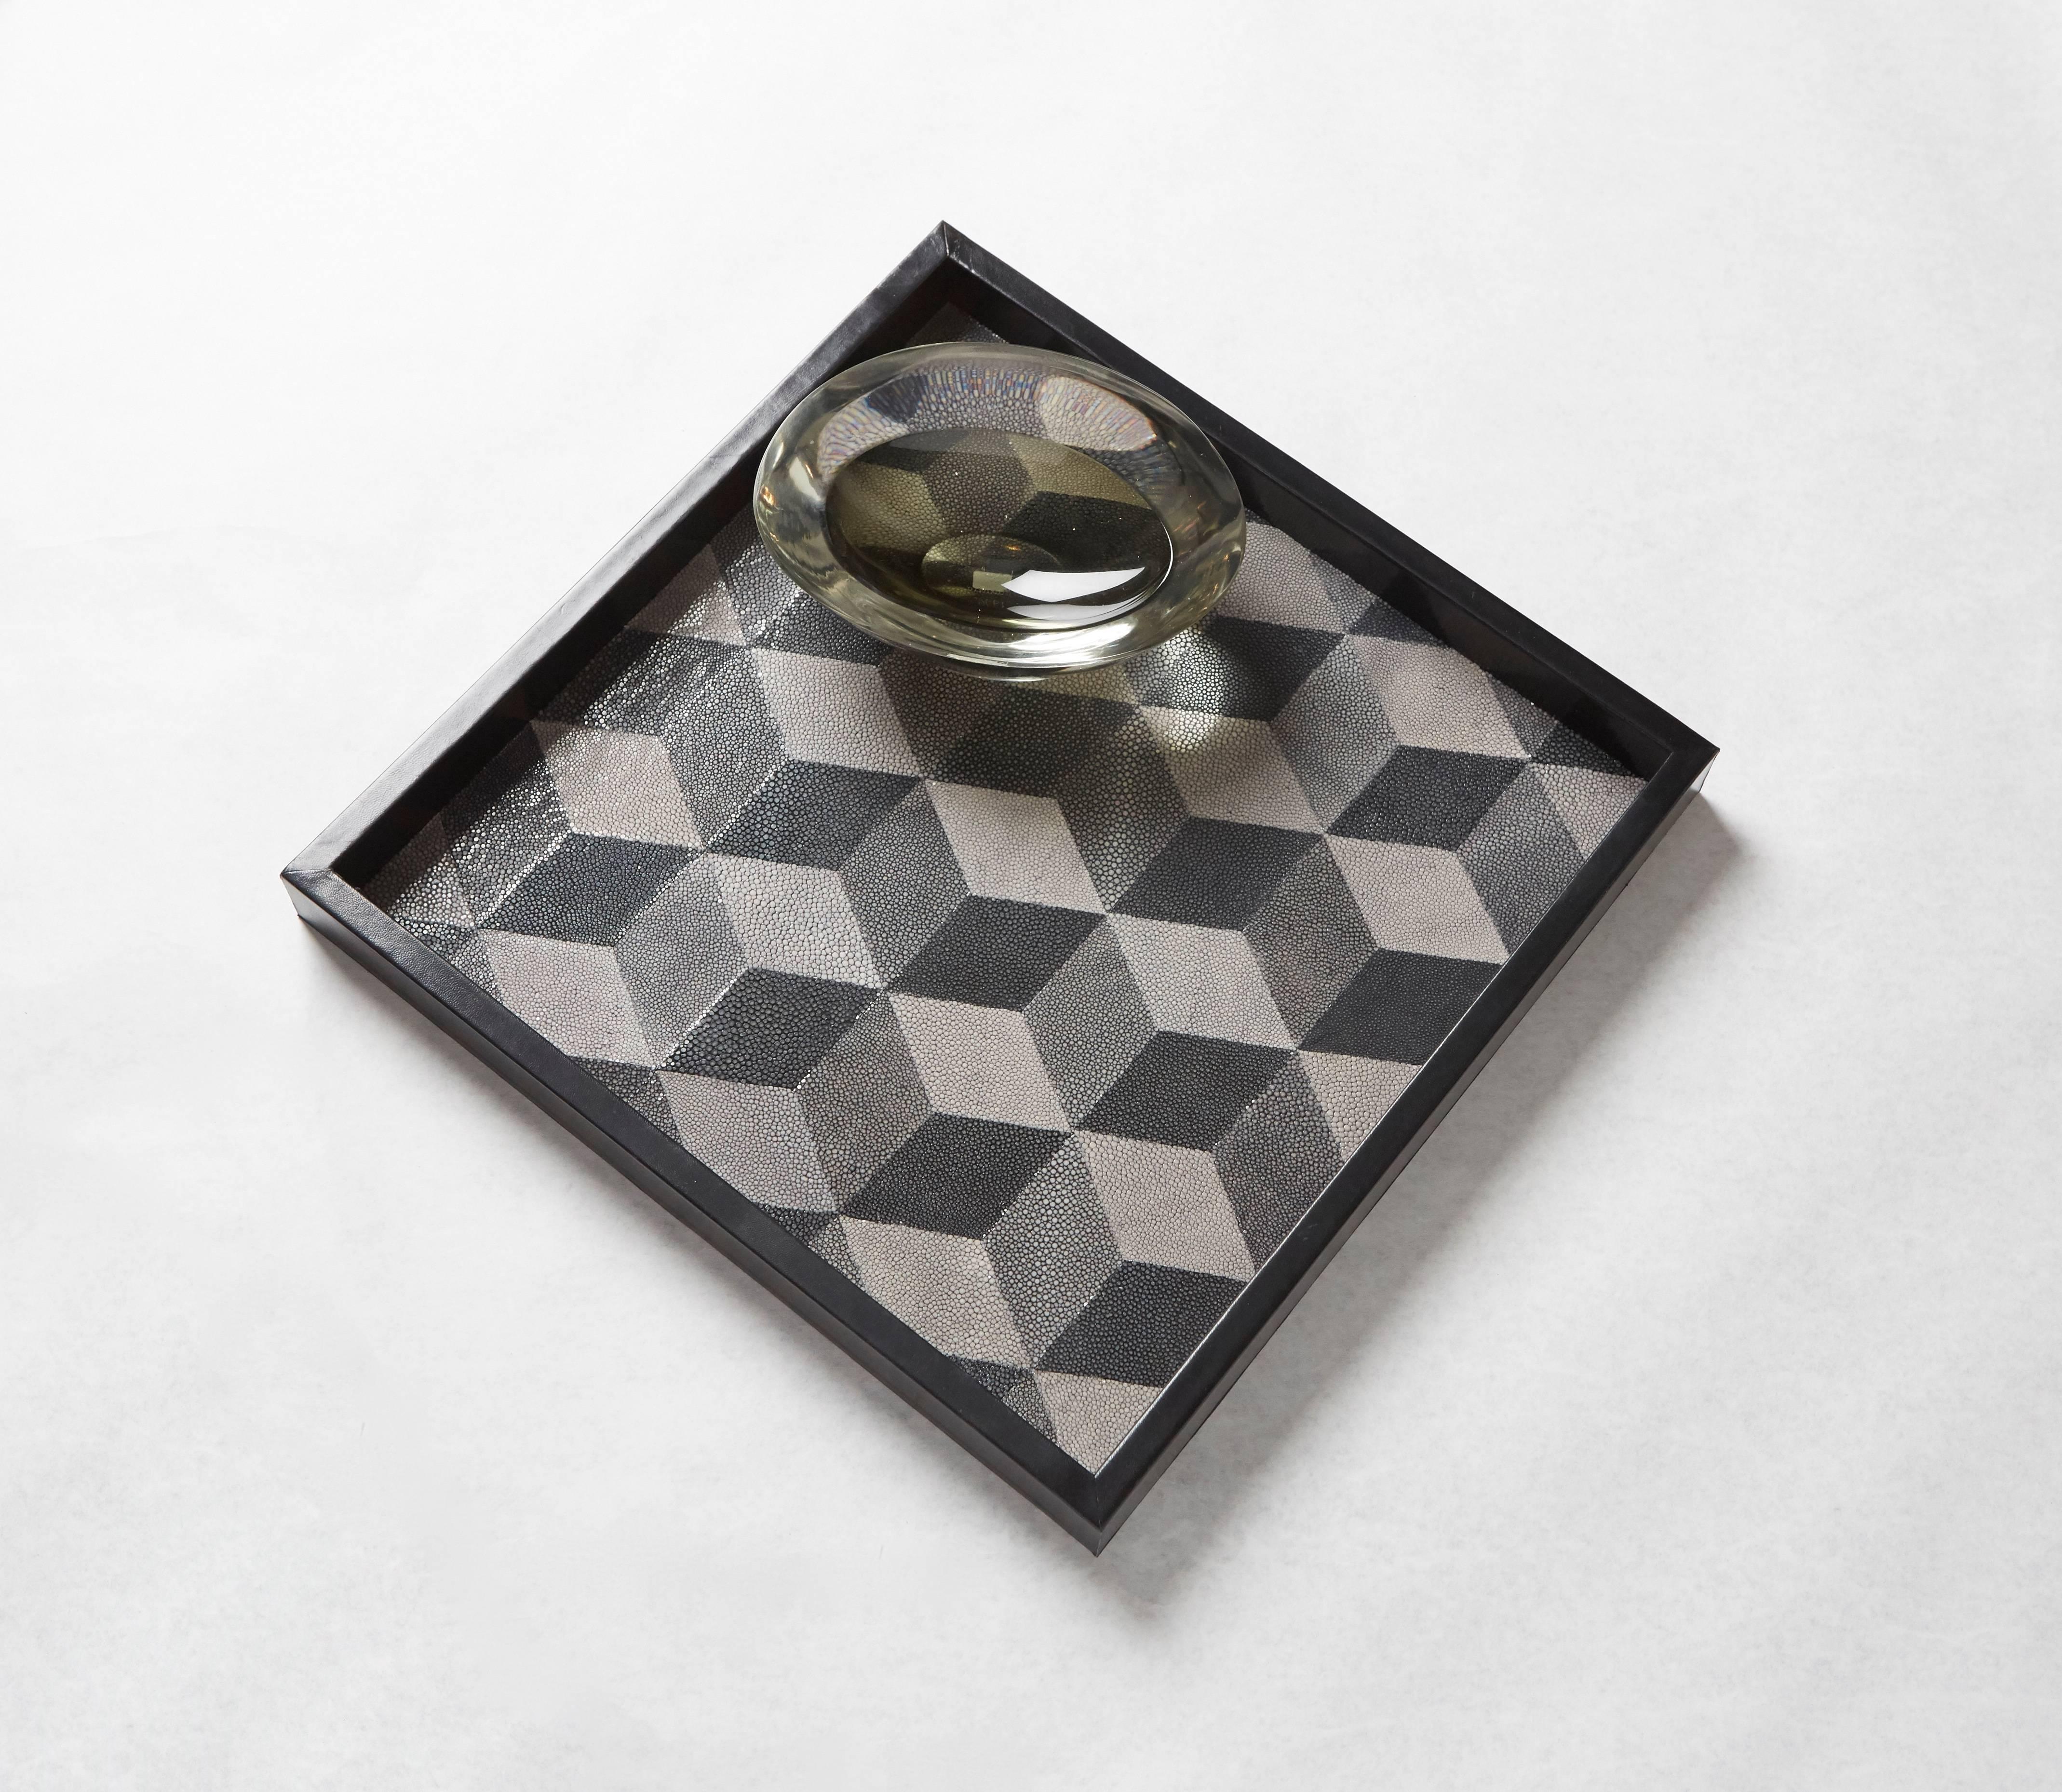 With an emphasis on textural and geometric elements, the Shagreen Geo tray is a masterpiece of symmetry and monochrome. Perfectly sized cubes in various gradients of gray appear to extend from the tray's surface with an Escher-esque quality of